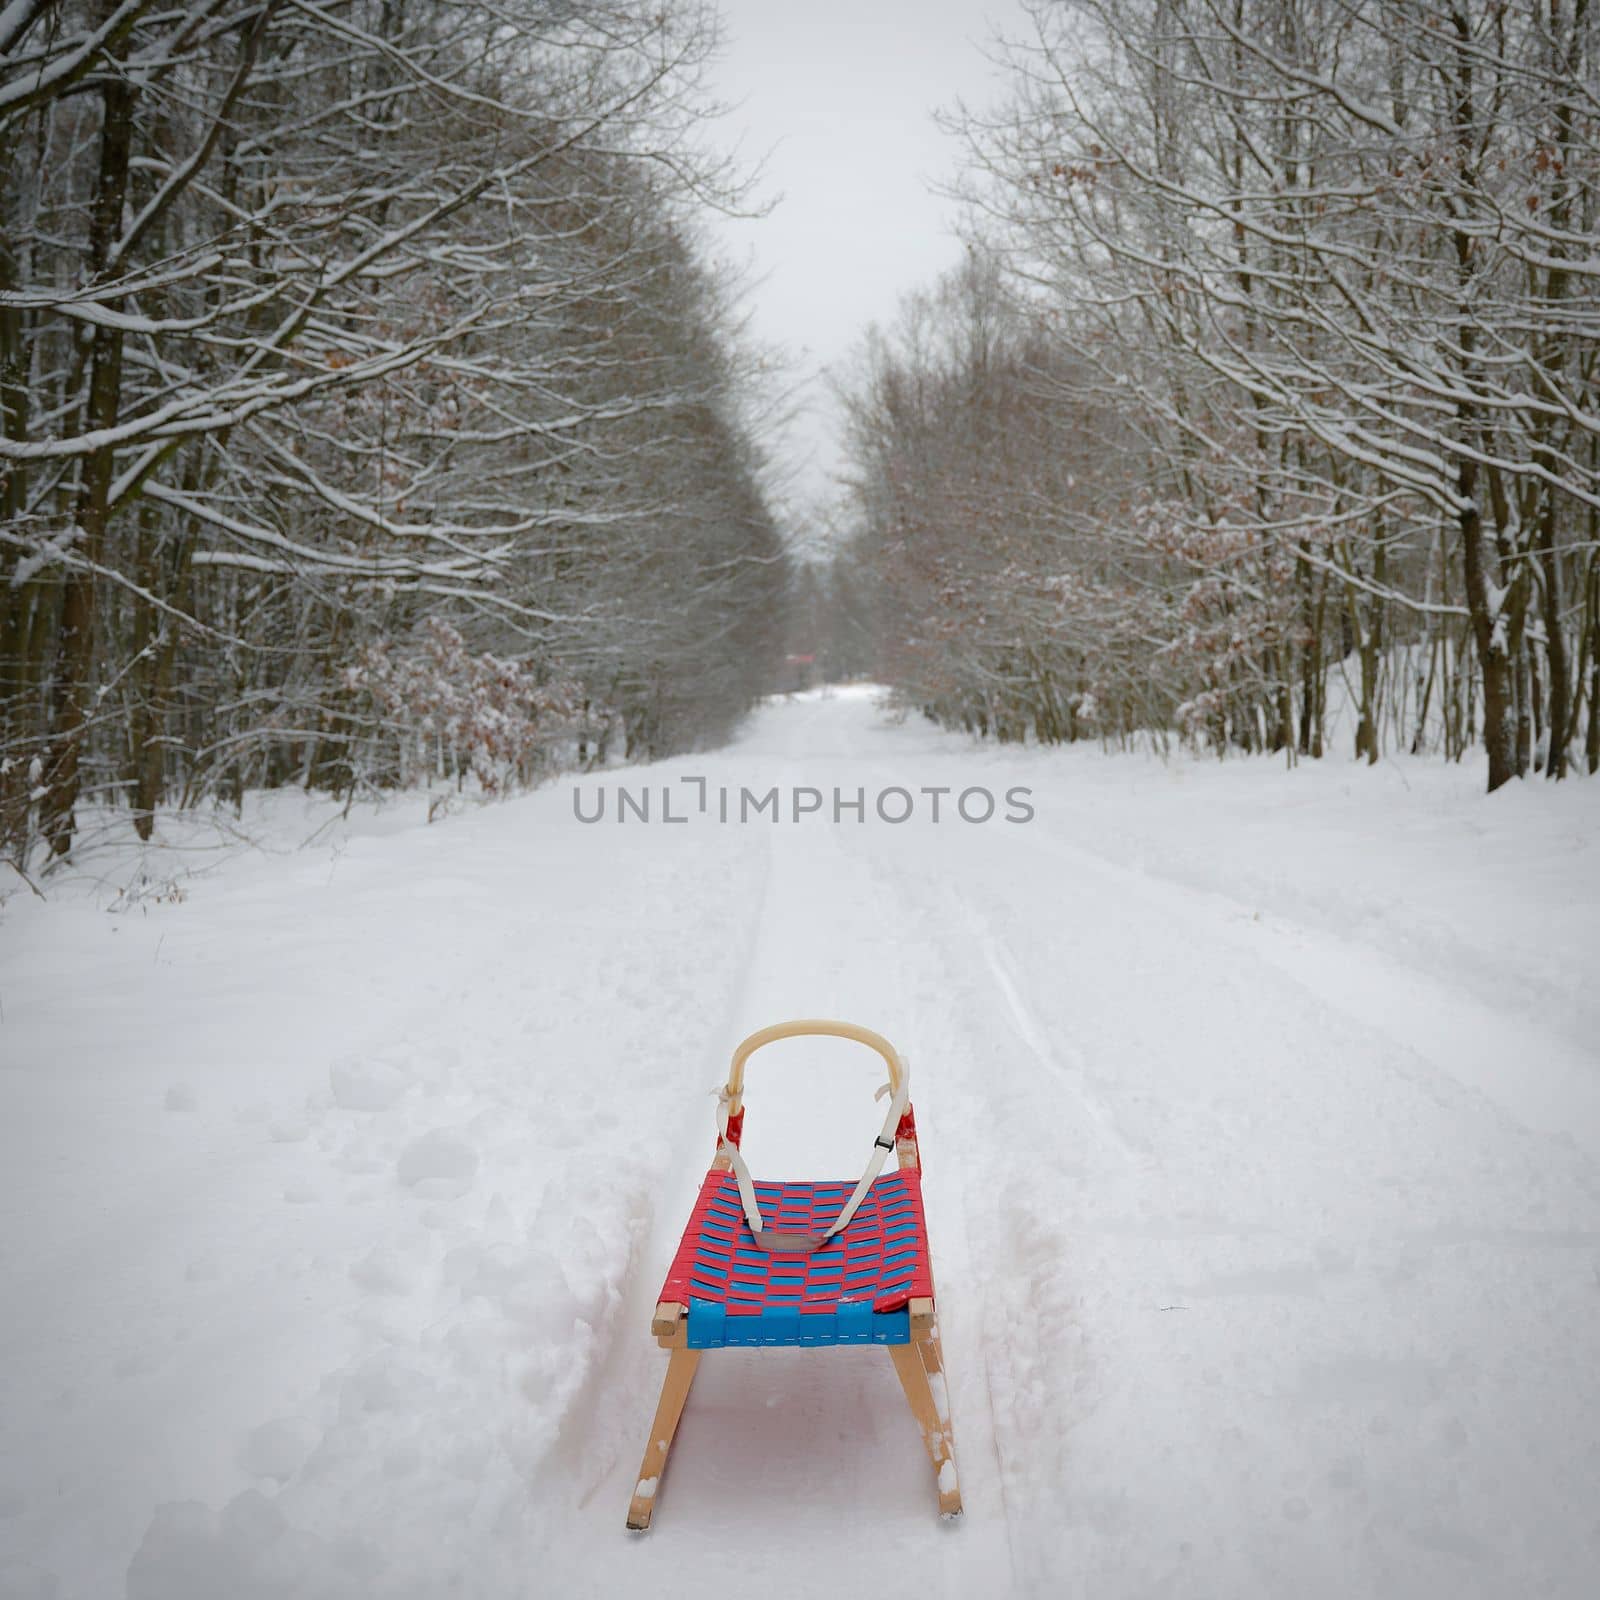 Winter background in nature with sled. Trees and snowy landscape during outdoor activities in winter. by Montypeter